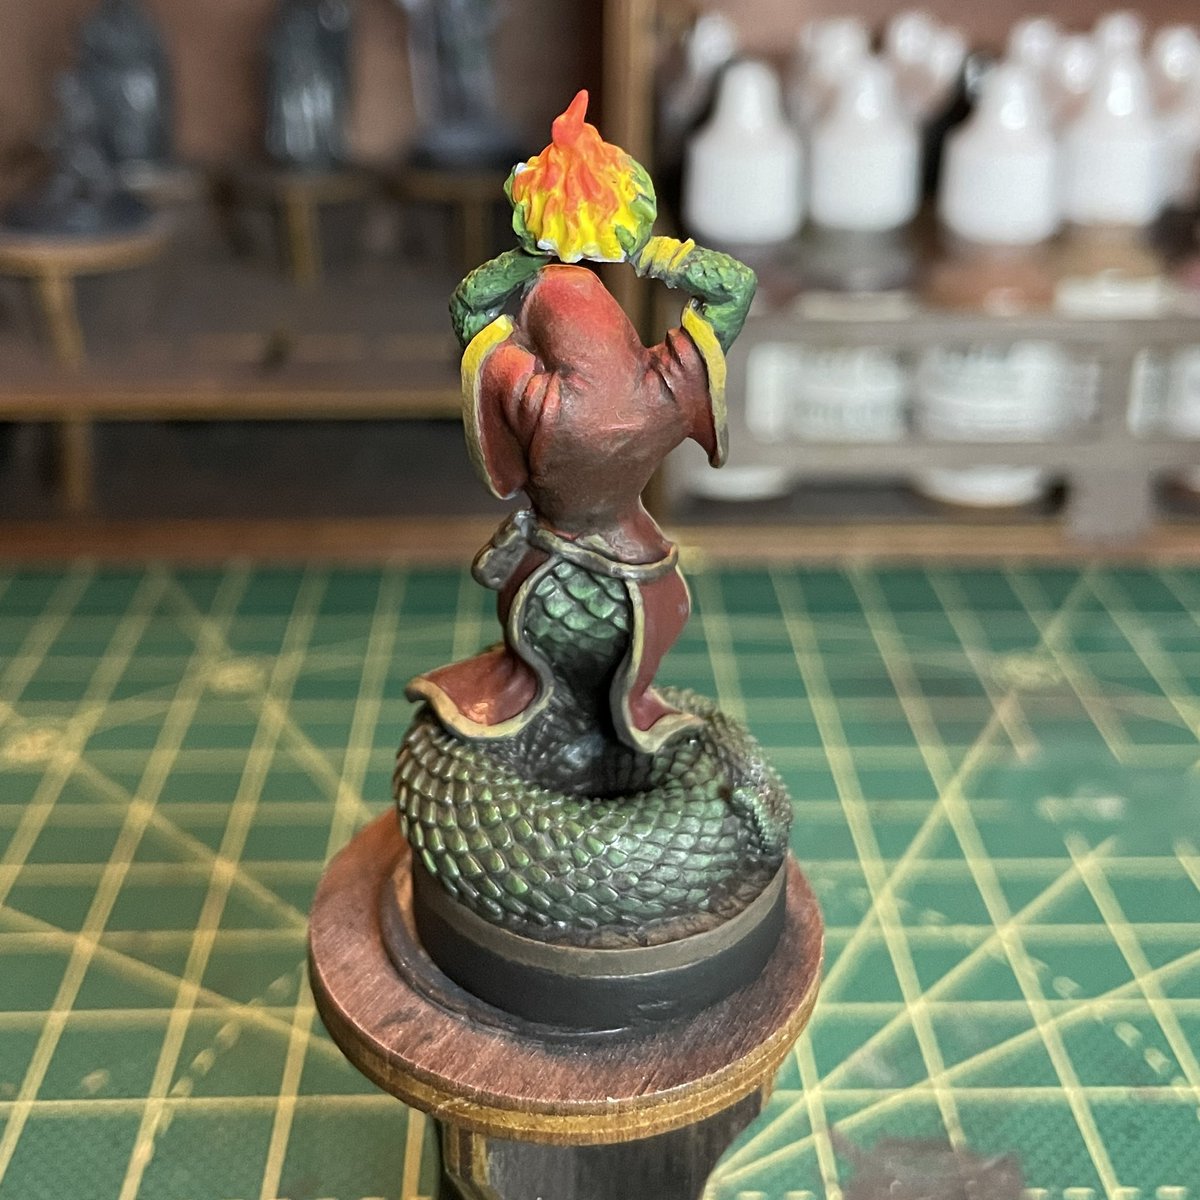 It’s been a while since I’ve painted a mini, and this weekend presented a good opportunity to pull out the brushes again 🎨🖌️ #miniaturepainting